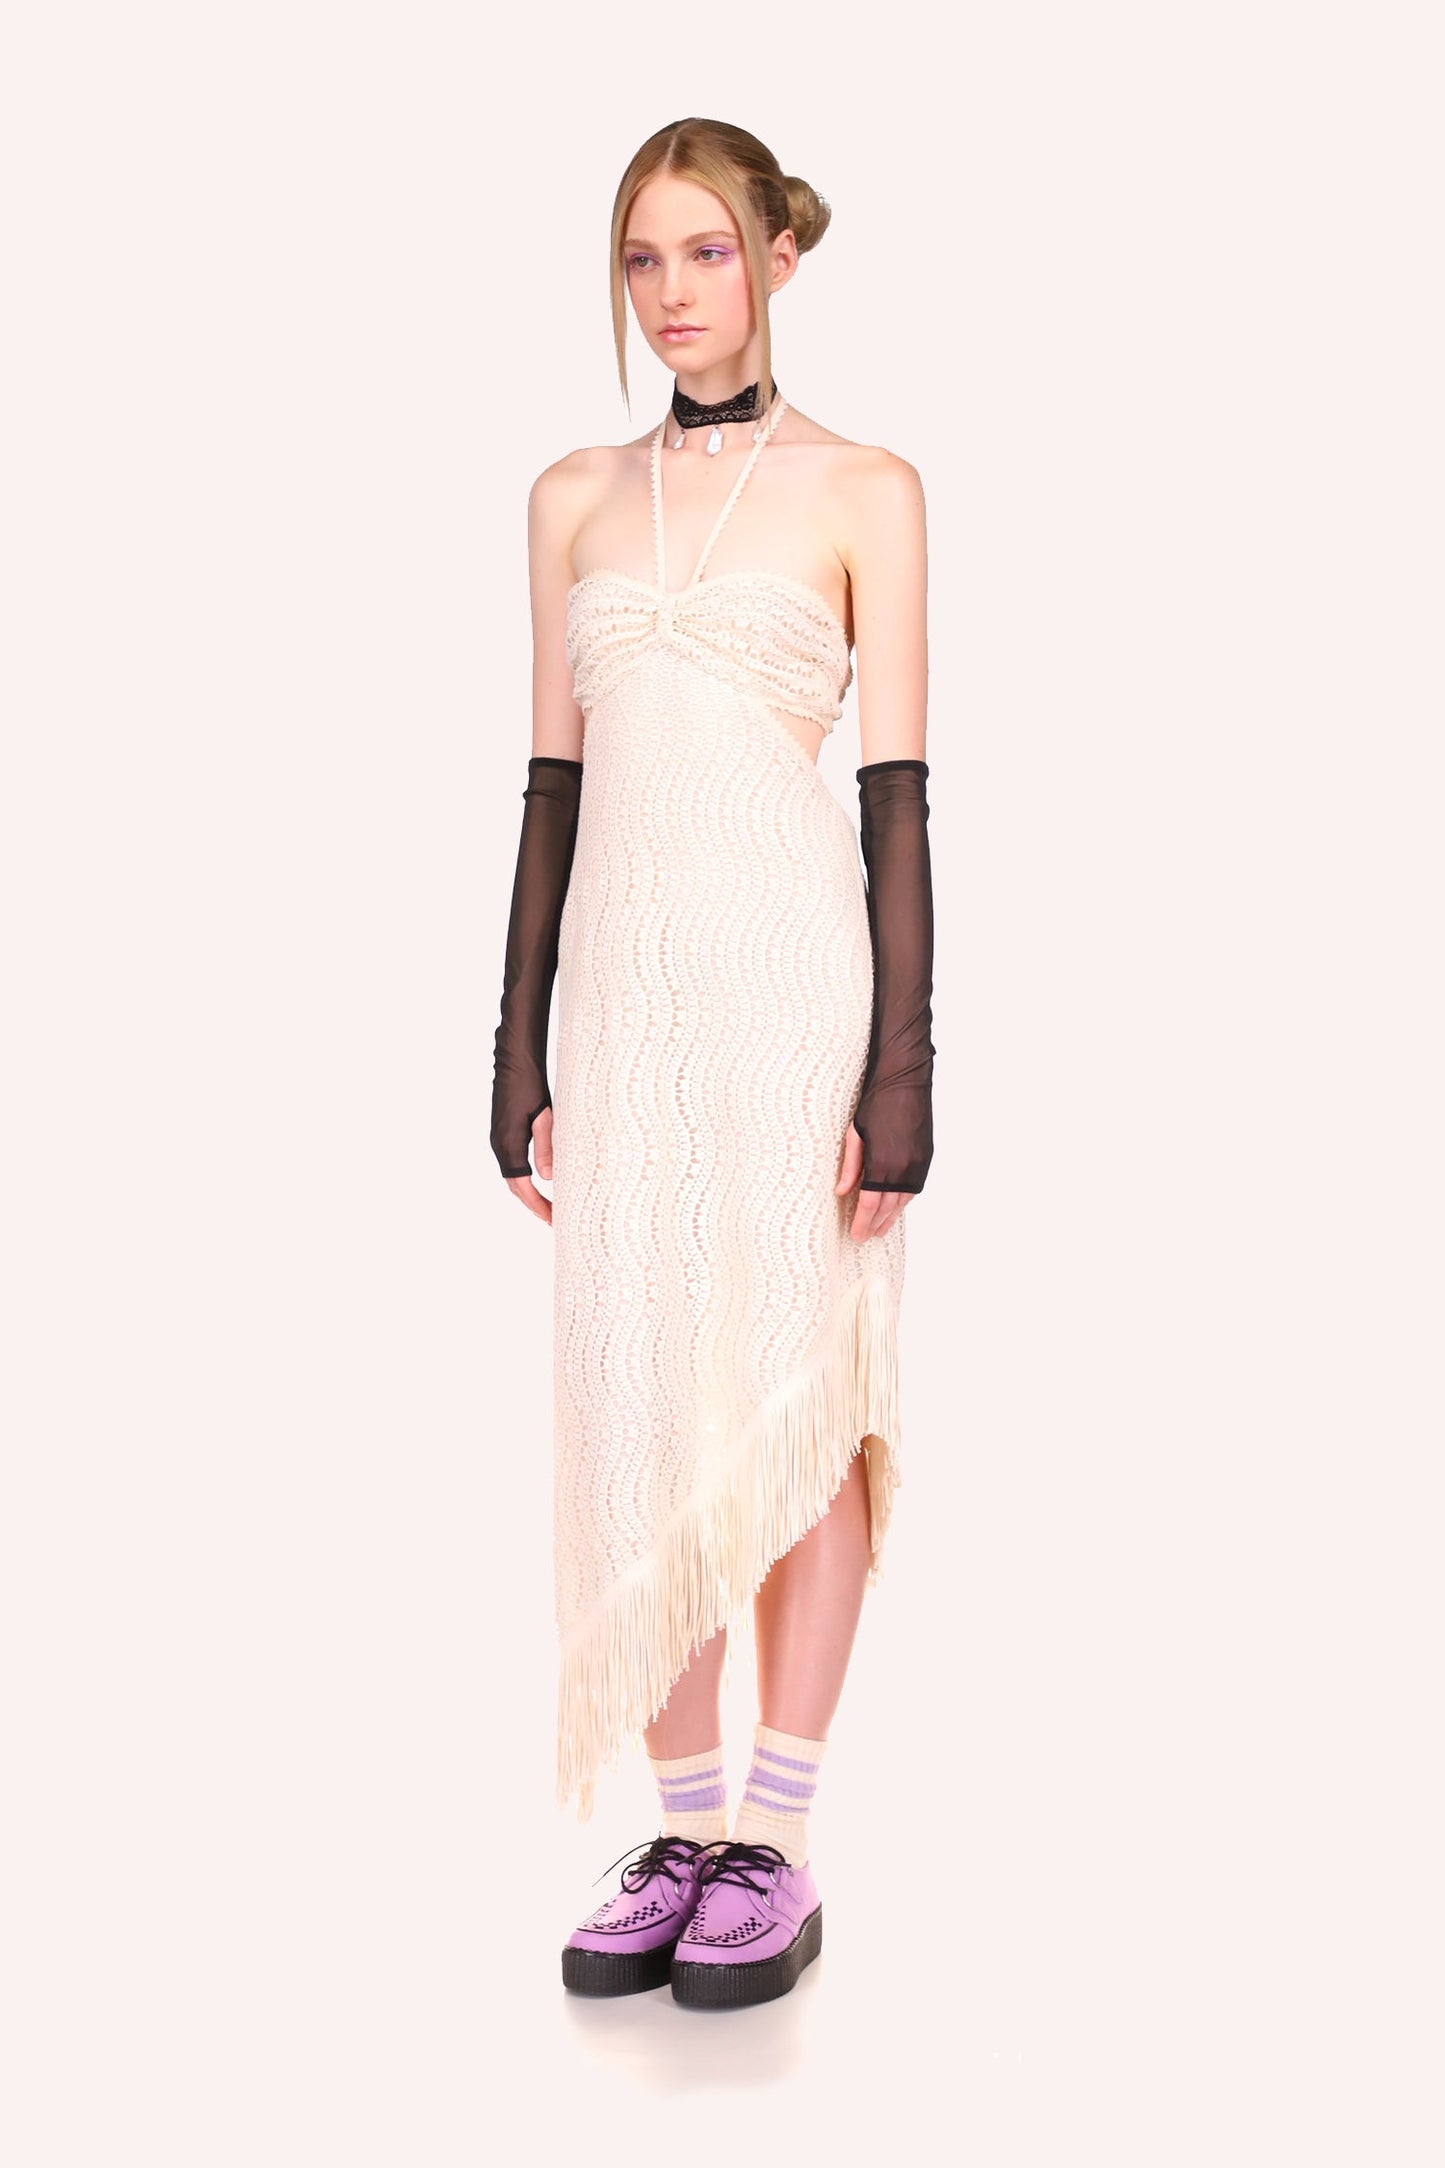 Sleeveless Dress Cream, 2 straps across the neck, ankles long with a 45-angle cut